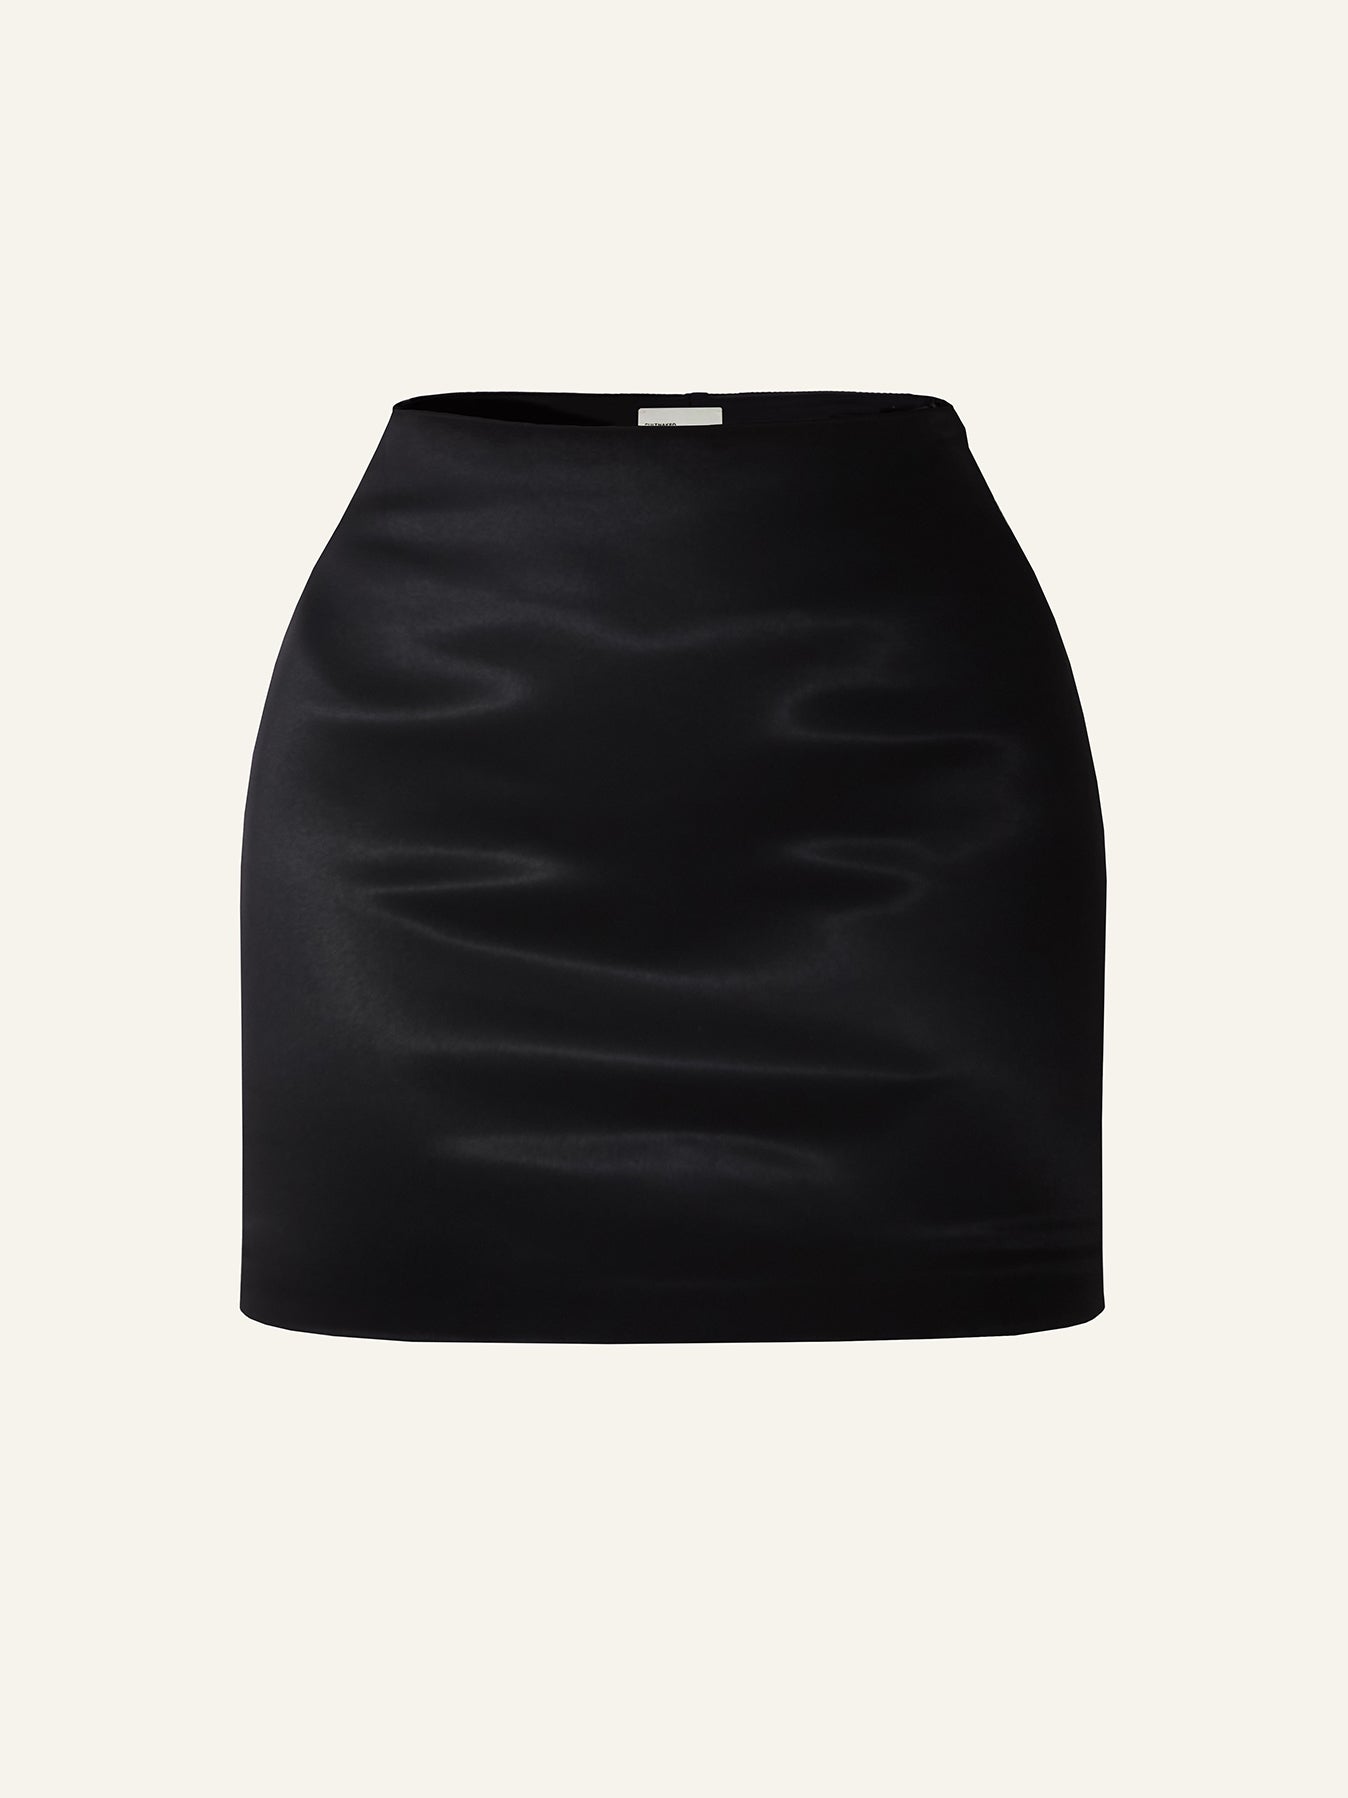 Product photo of a black mini skort with high rise